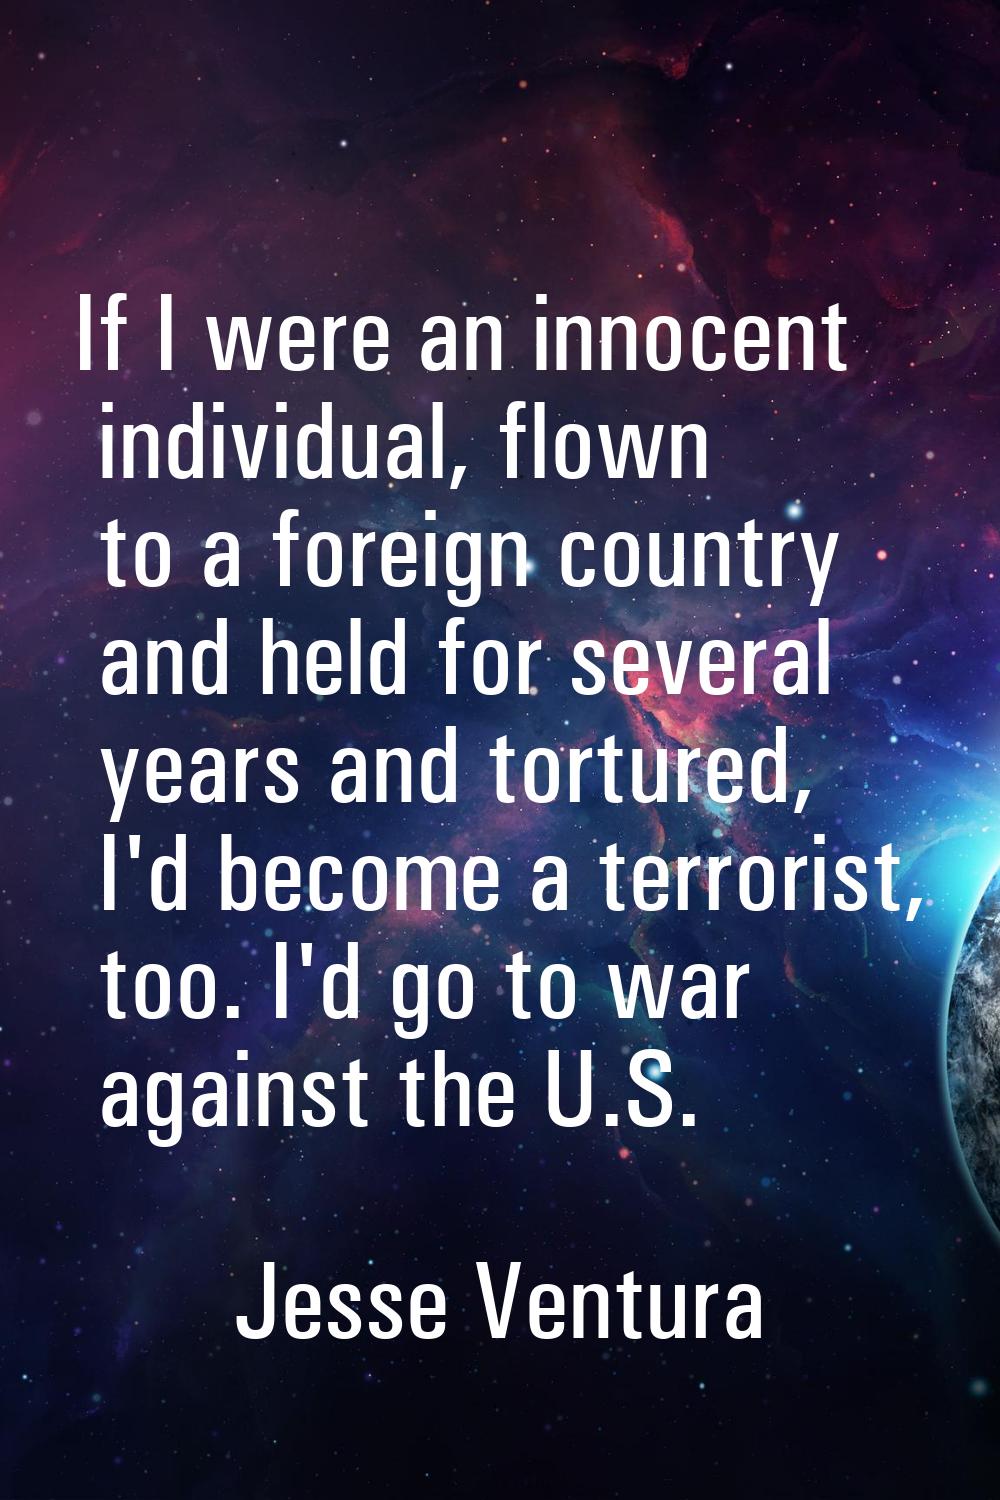 If I were an innocent individual, flown to a foreign country and held for several years and torture